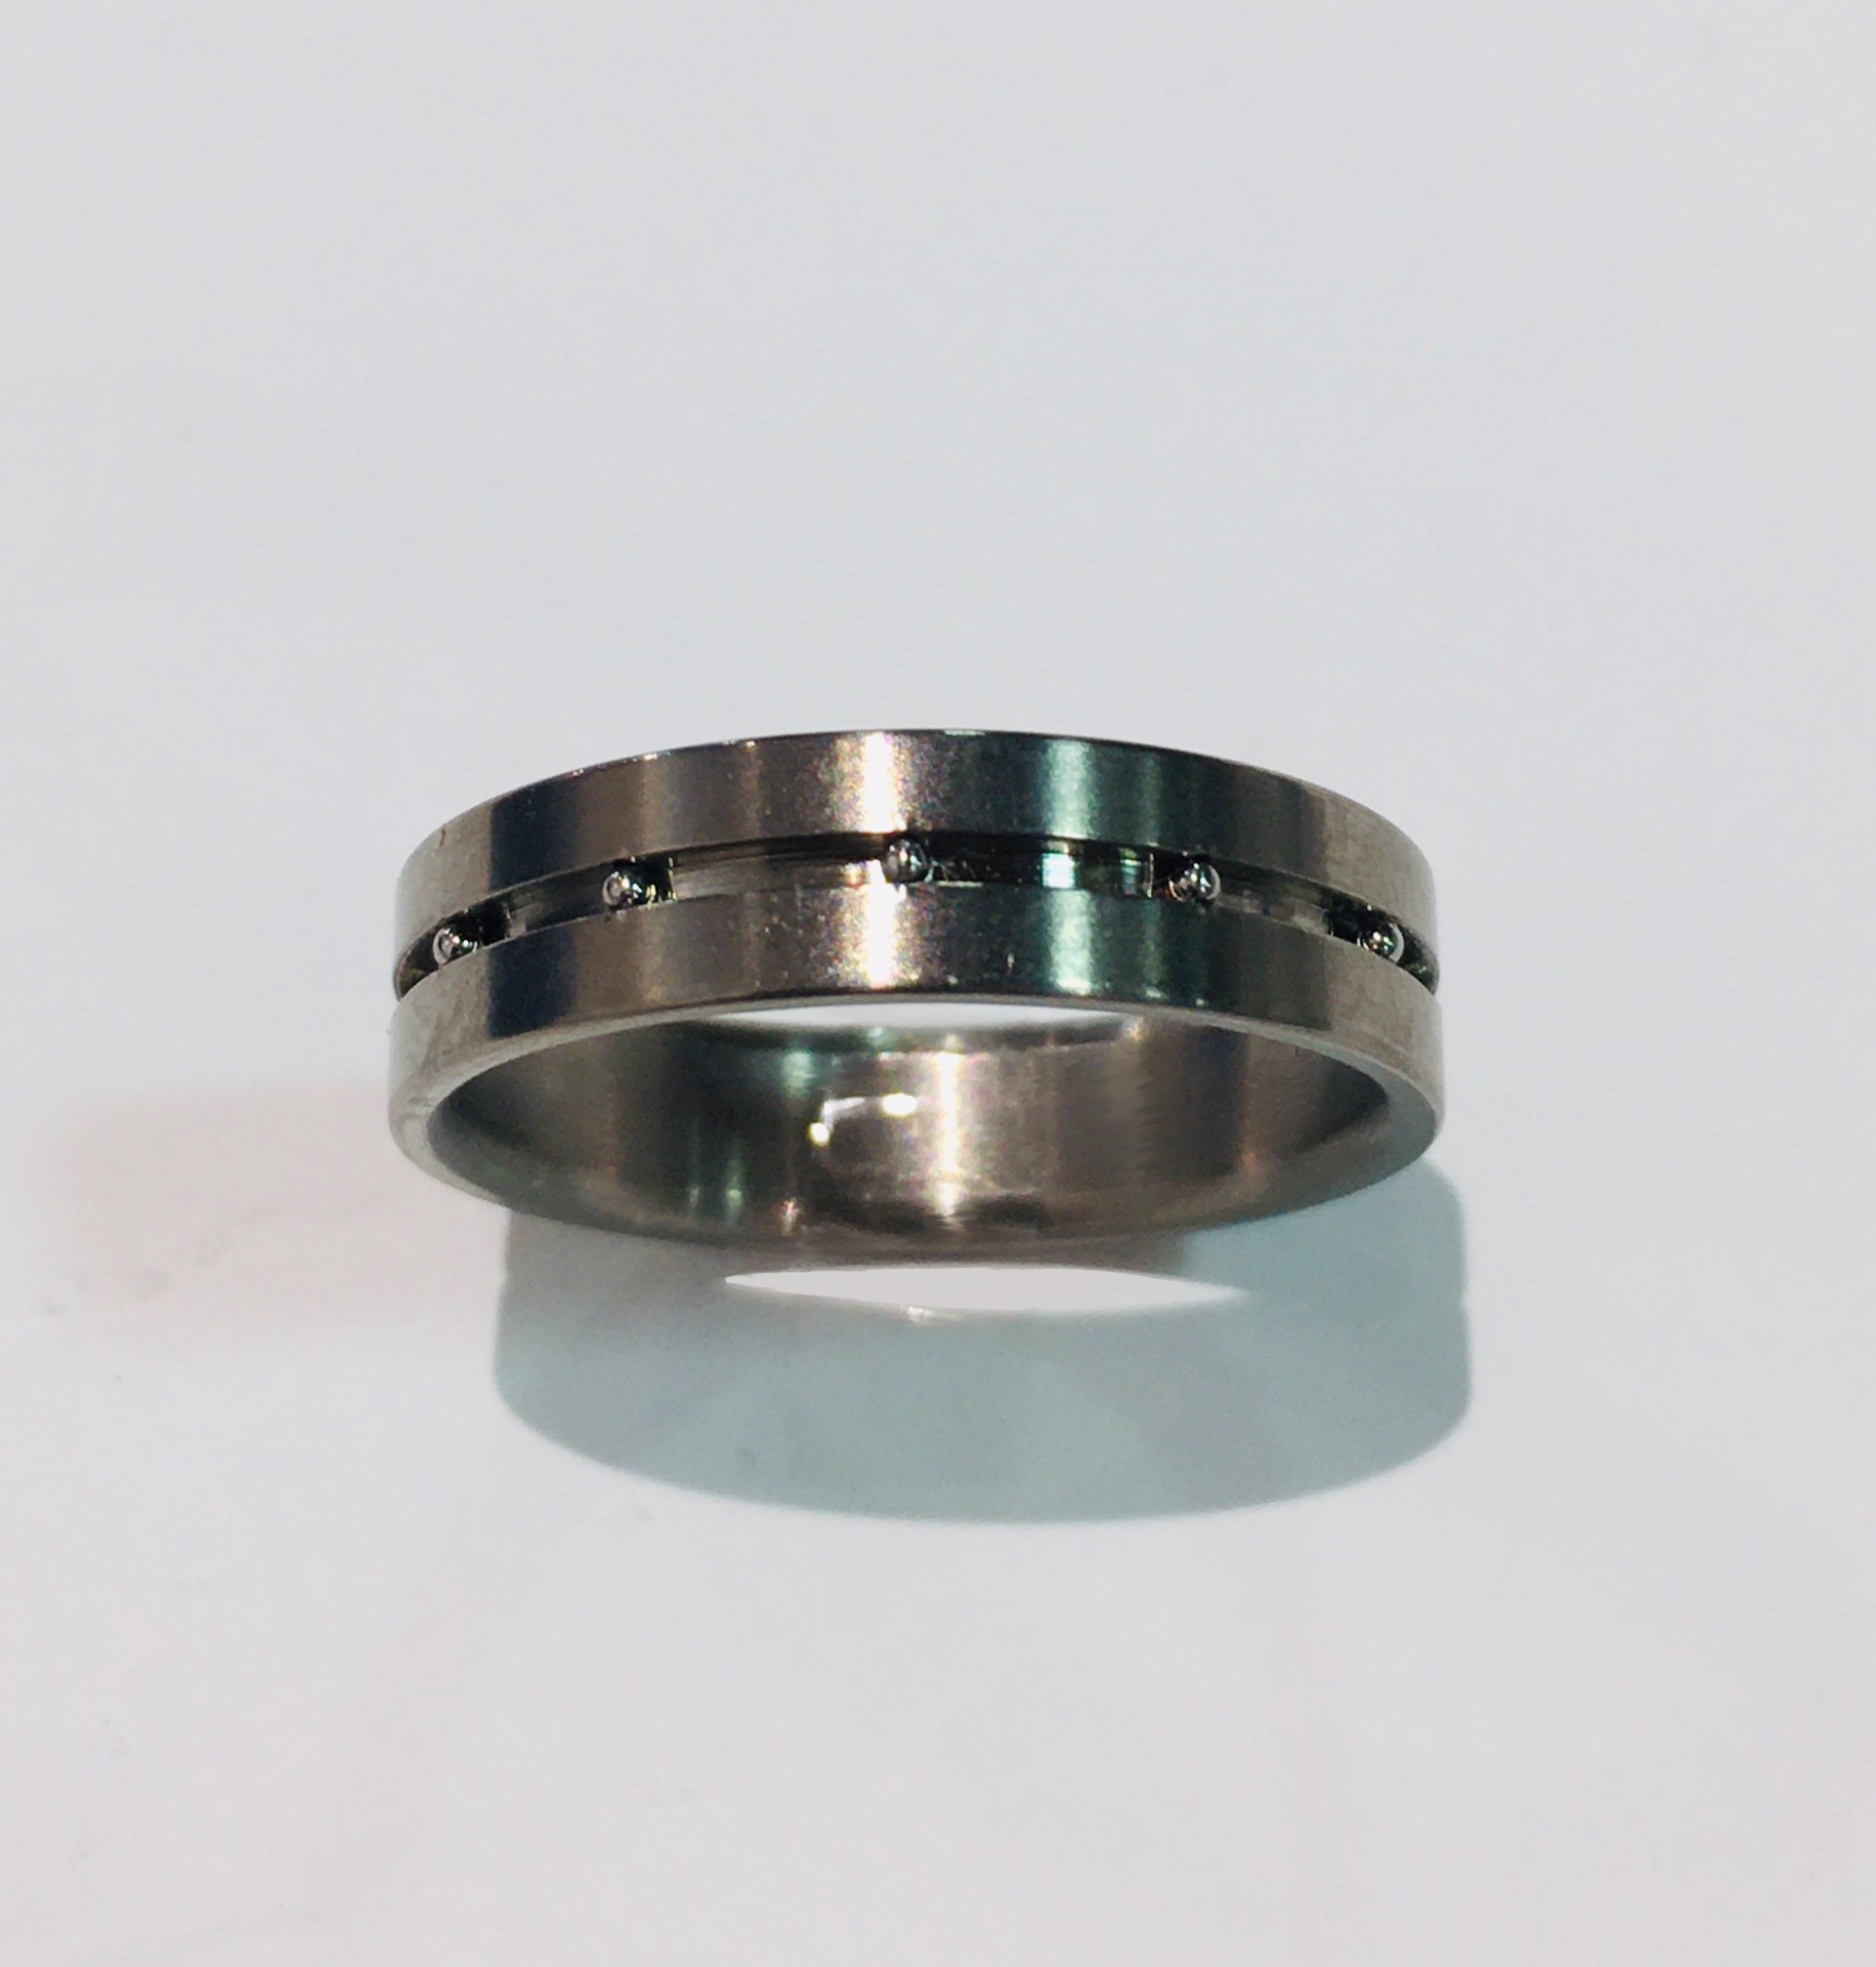 Titanium Band with Steel Balls in Center by WES & GOLD